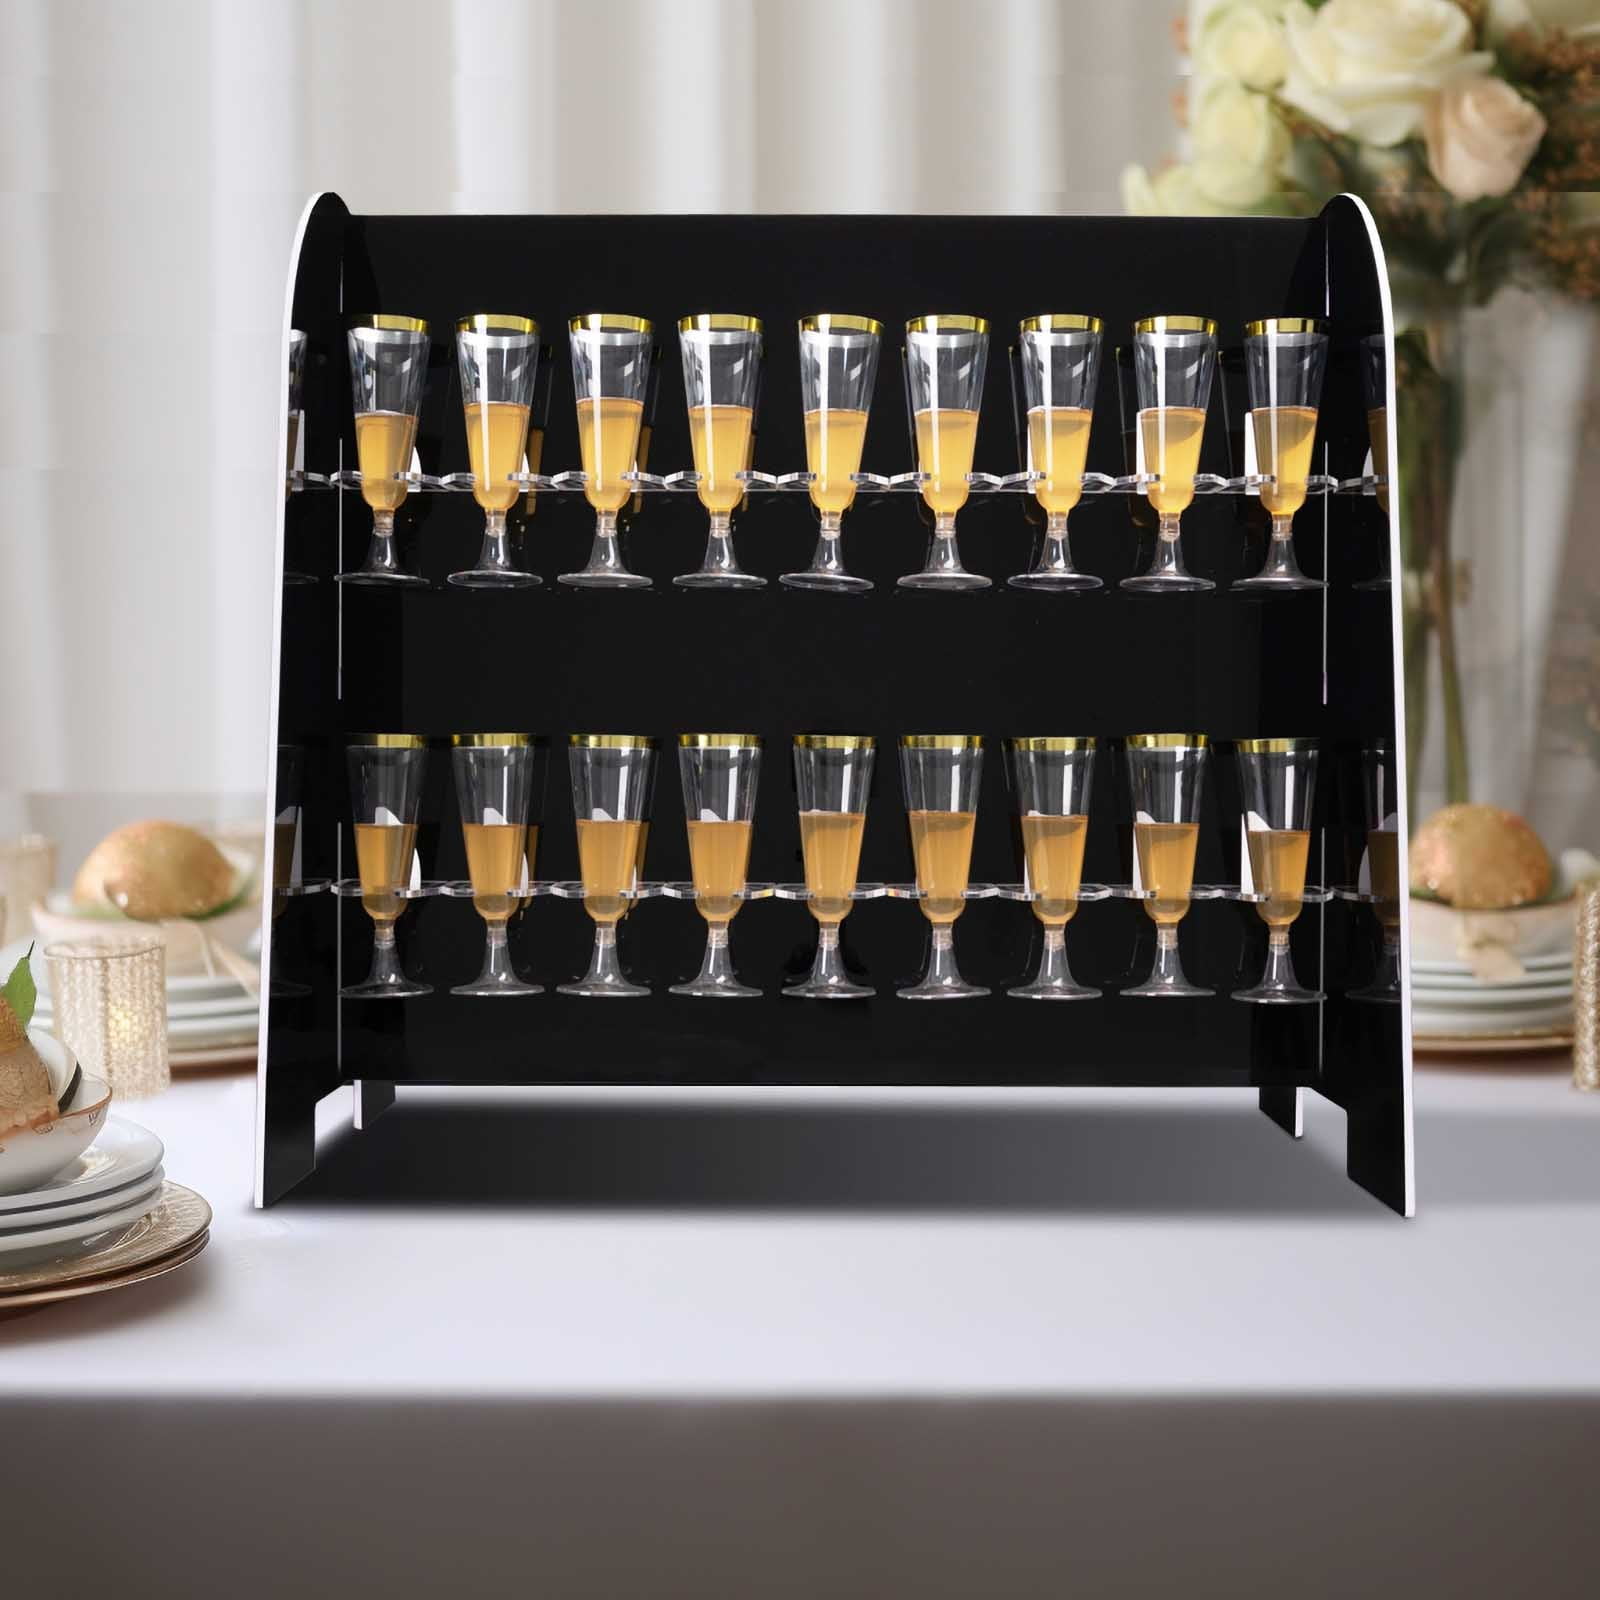  Tree Bar Cocktail Tree Stand, Black Metal Display Stand For  Wine, Champagne, Cocktails, and Shot Glasses at Weddings, Parties, and  Brunch - 12 holders, 2 ft tall : Home & Kitchen